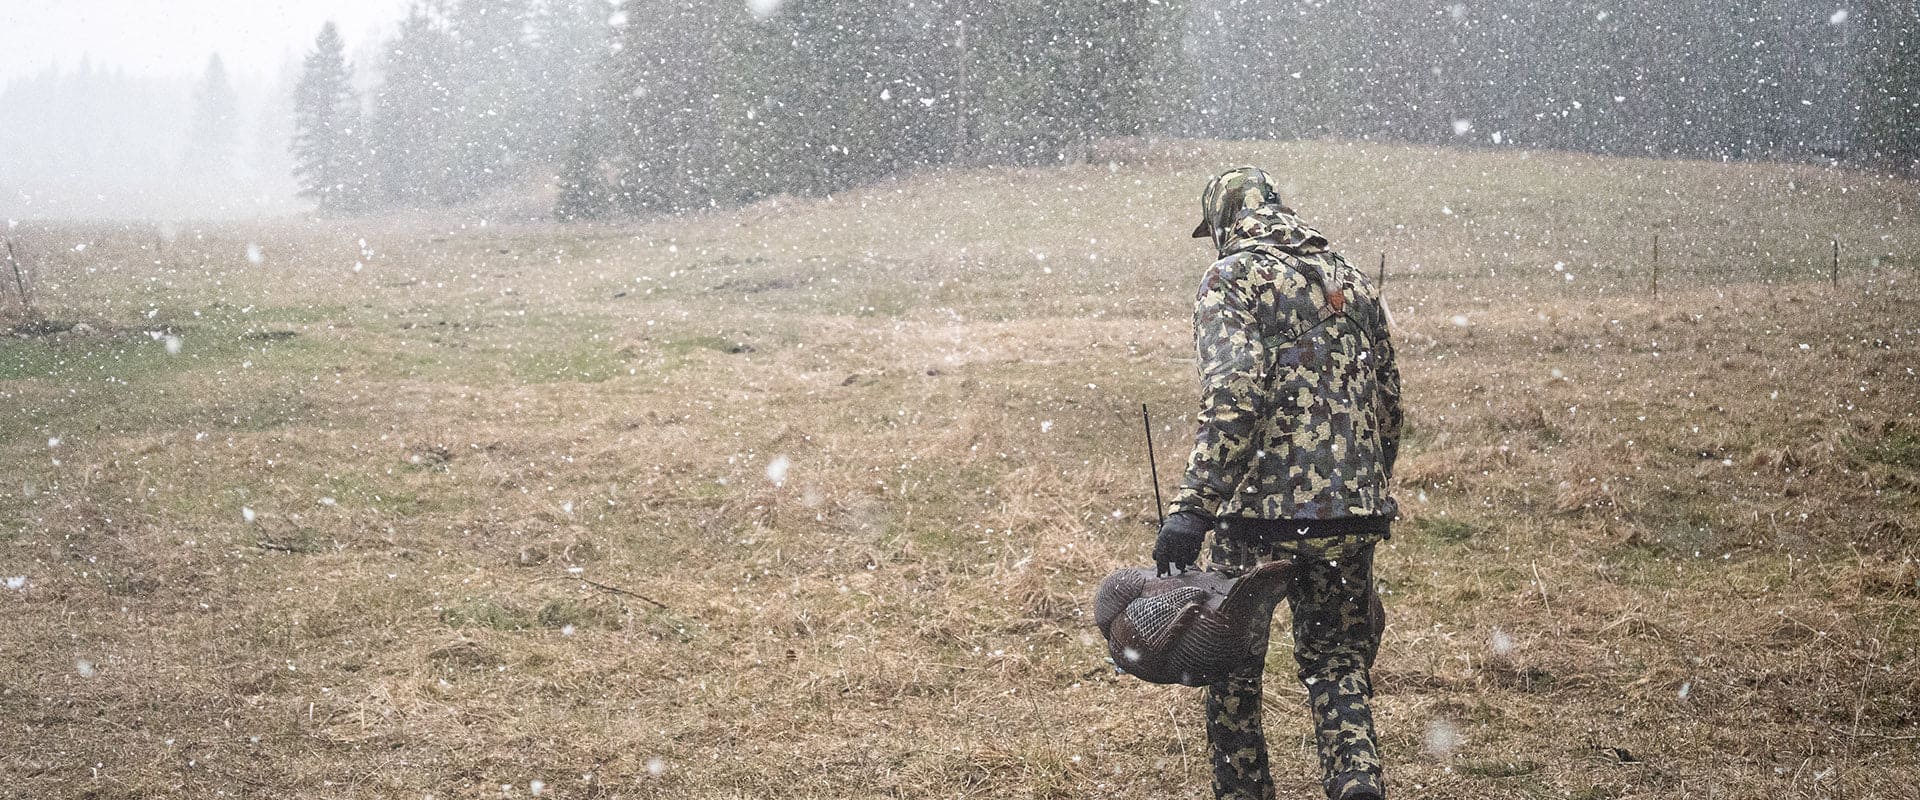 Tips for Turkey Hunting In the Rain